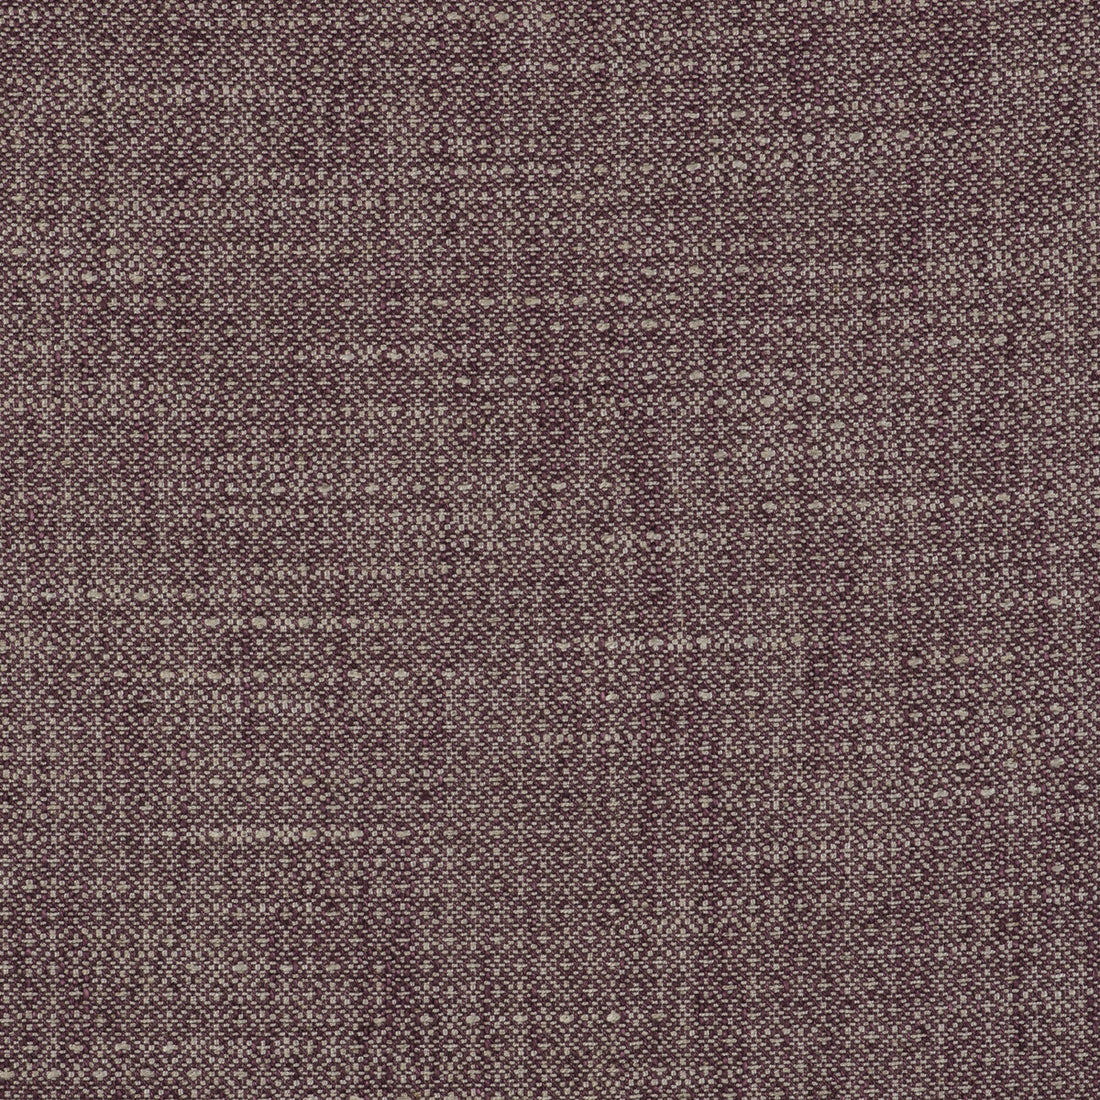 Kf Gyd fabric - pattern GDT5517.012.0 - by Gaston y Daniela in the Gaston Libreria collection